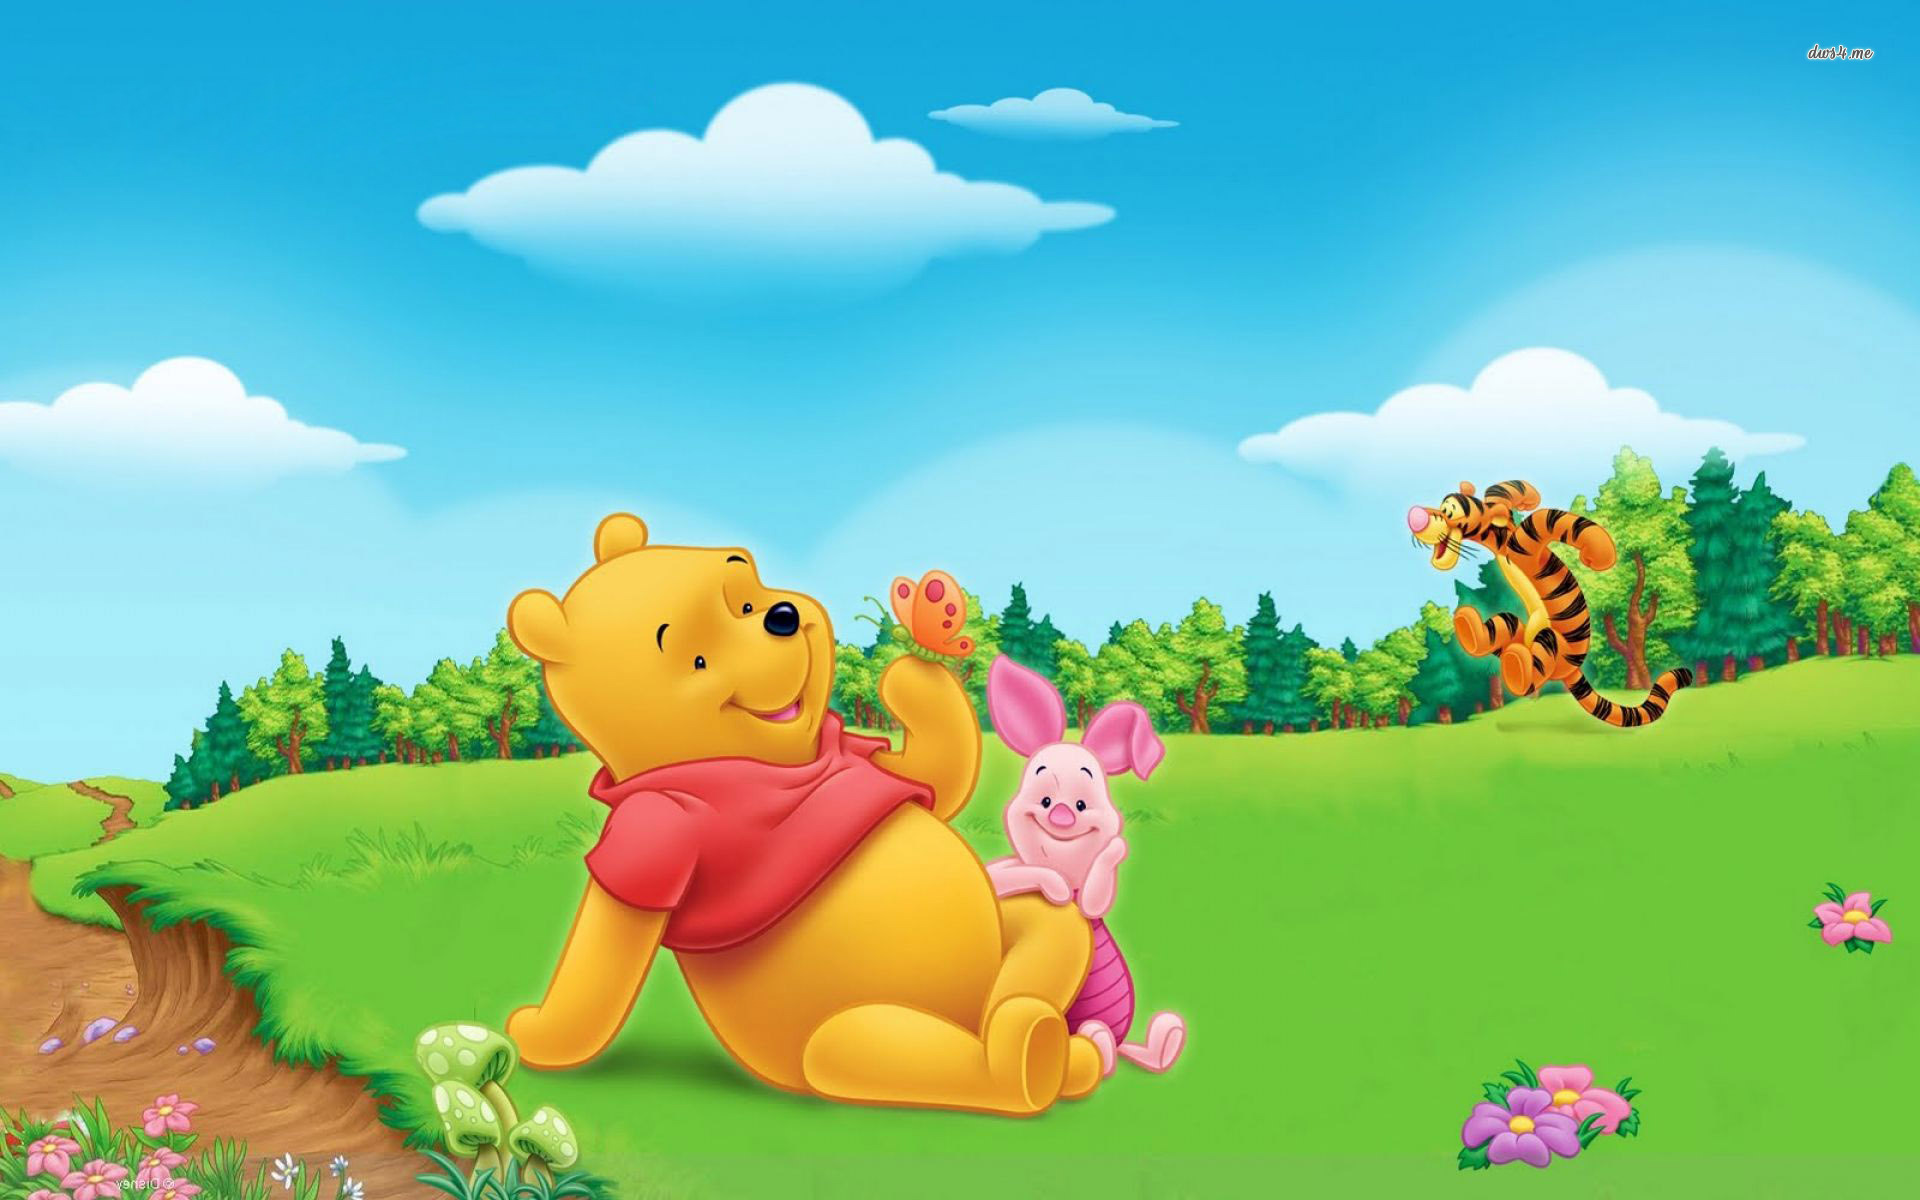 Winnie The Pooh Wallpapers HD A1